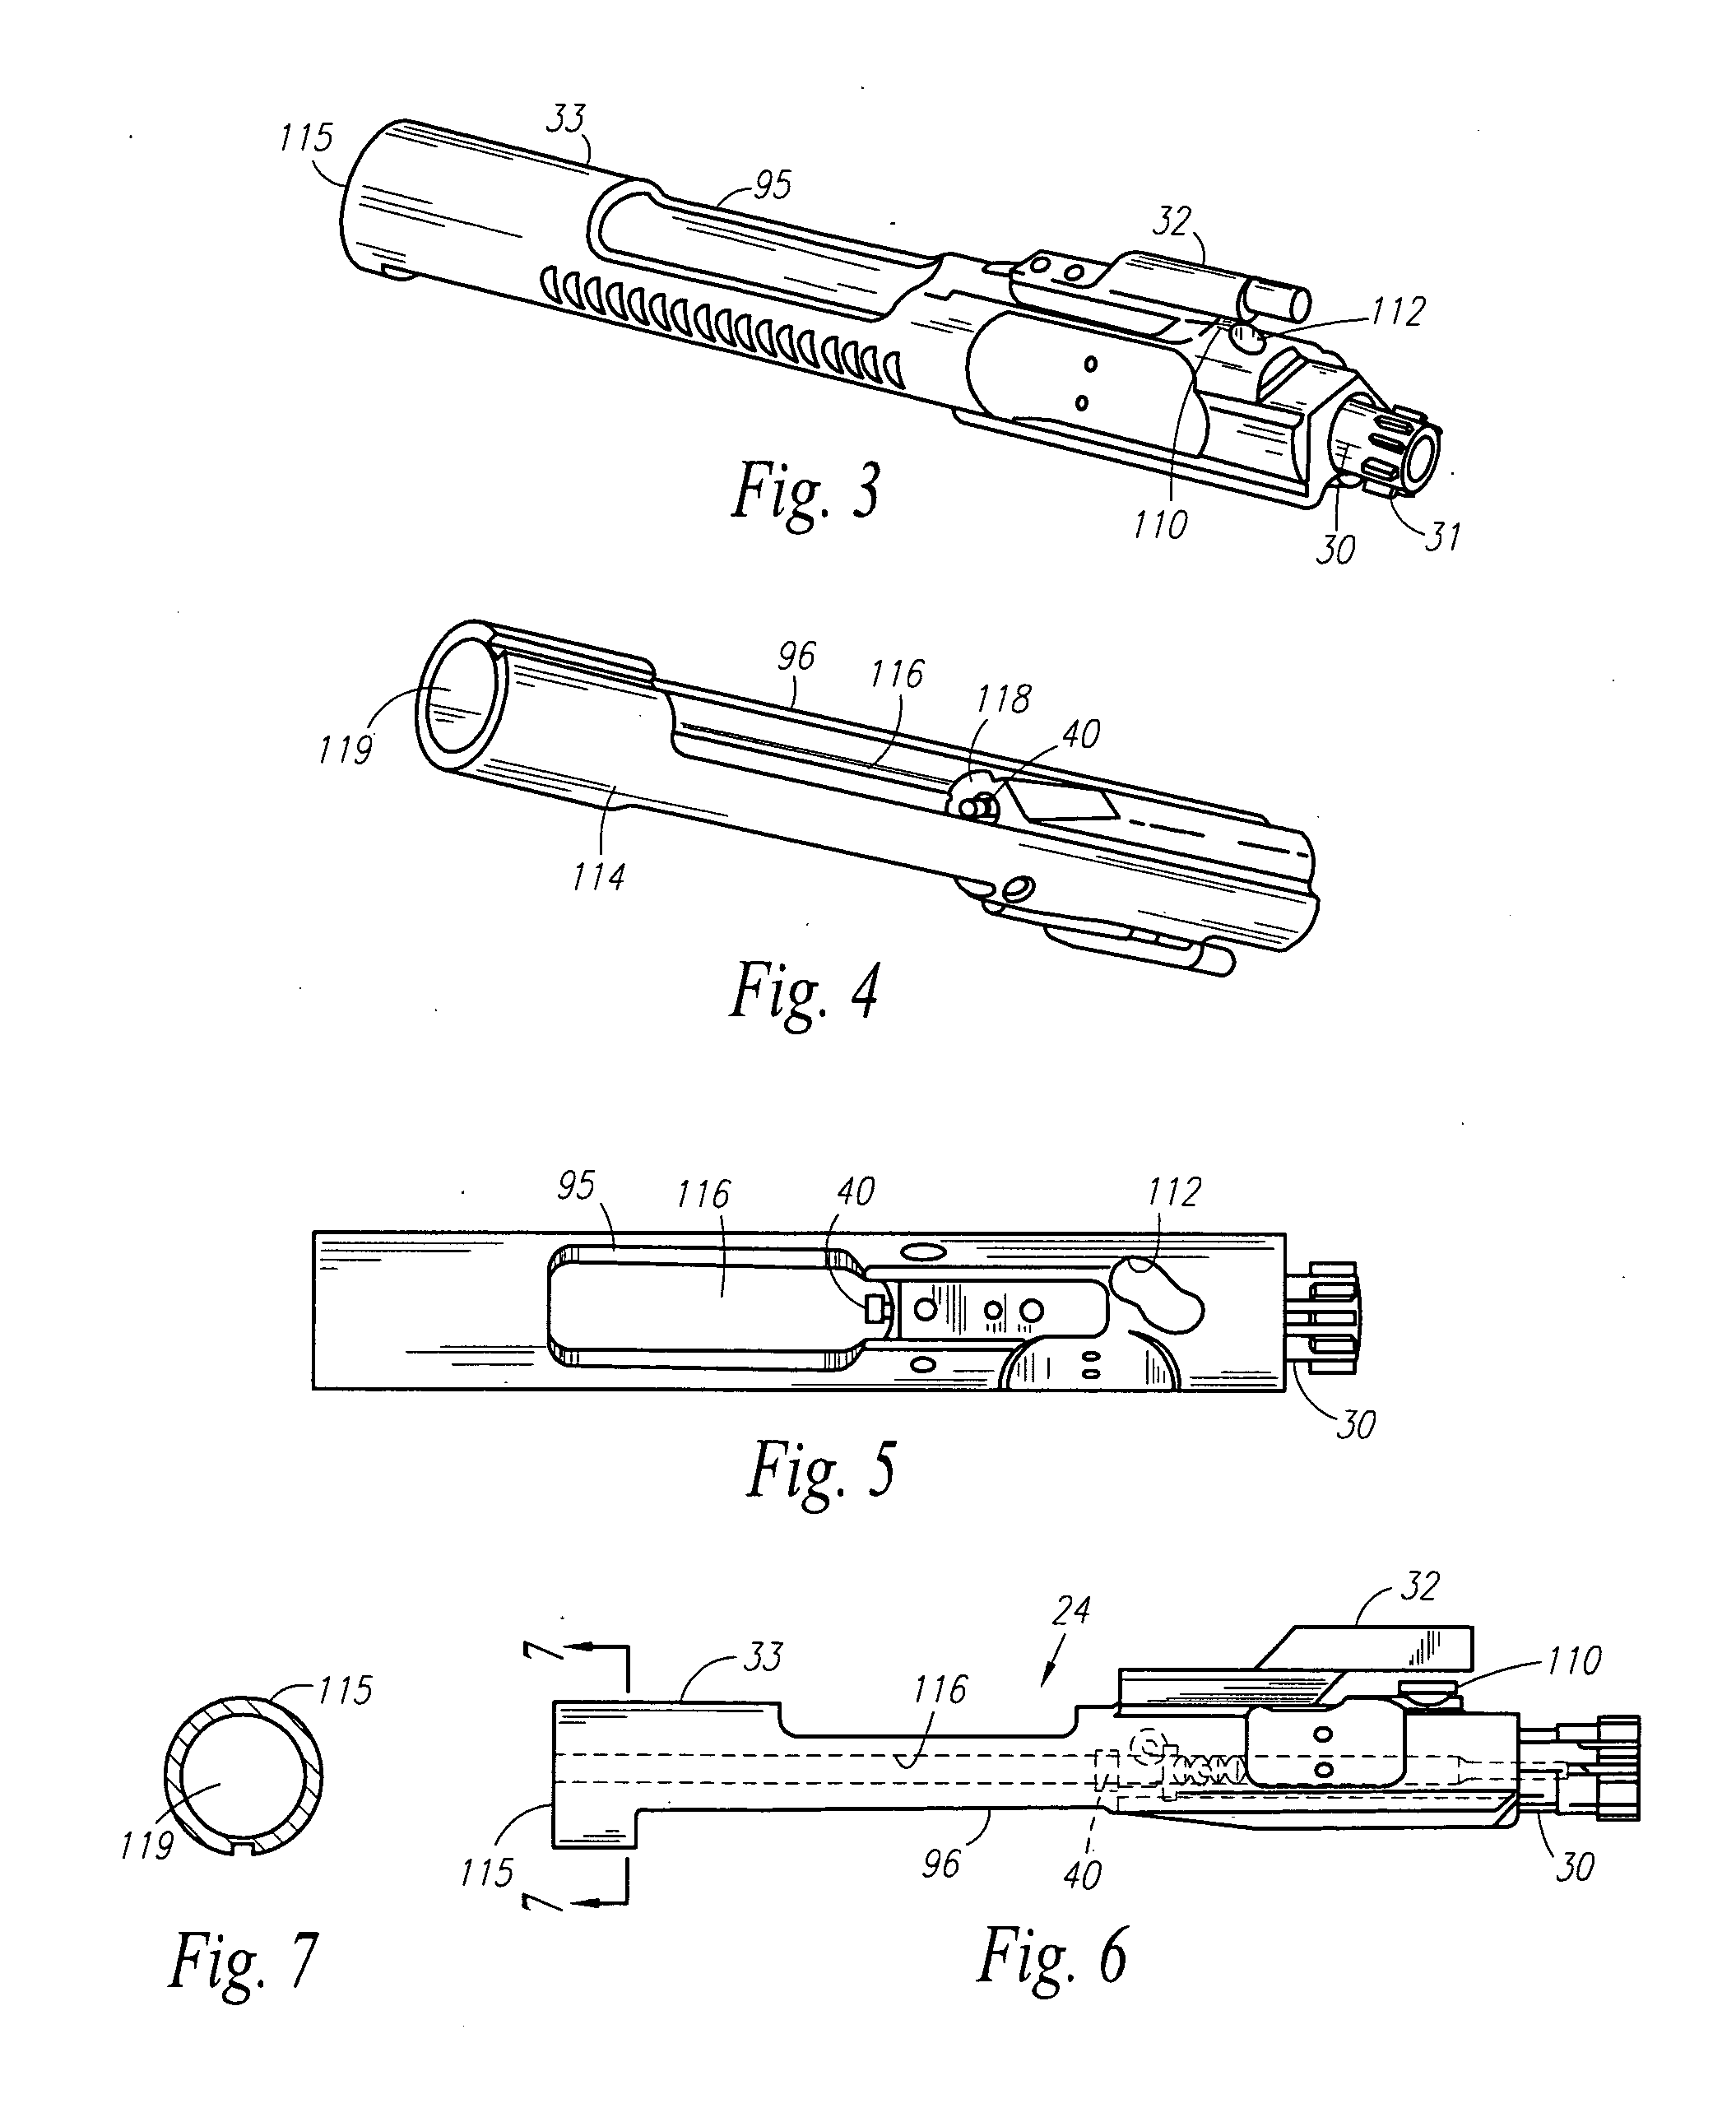 Device And Method For Converting And Preventing Conversion Of A Semi-Automatic Firearm To An Automatic Firearm